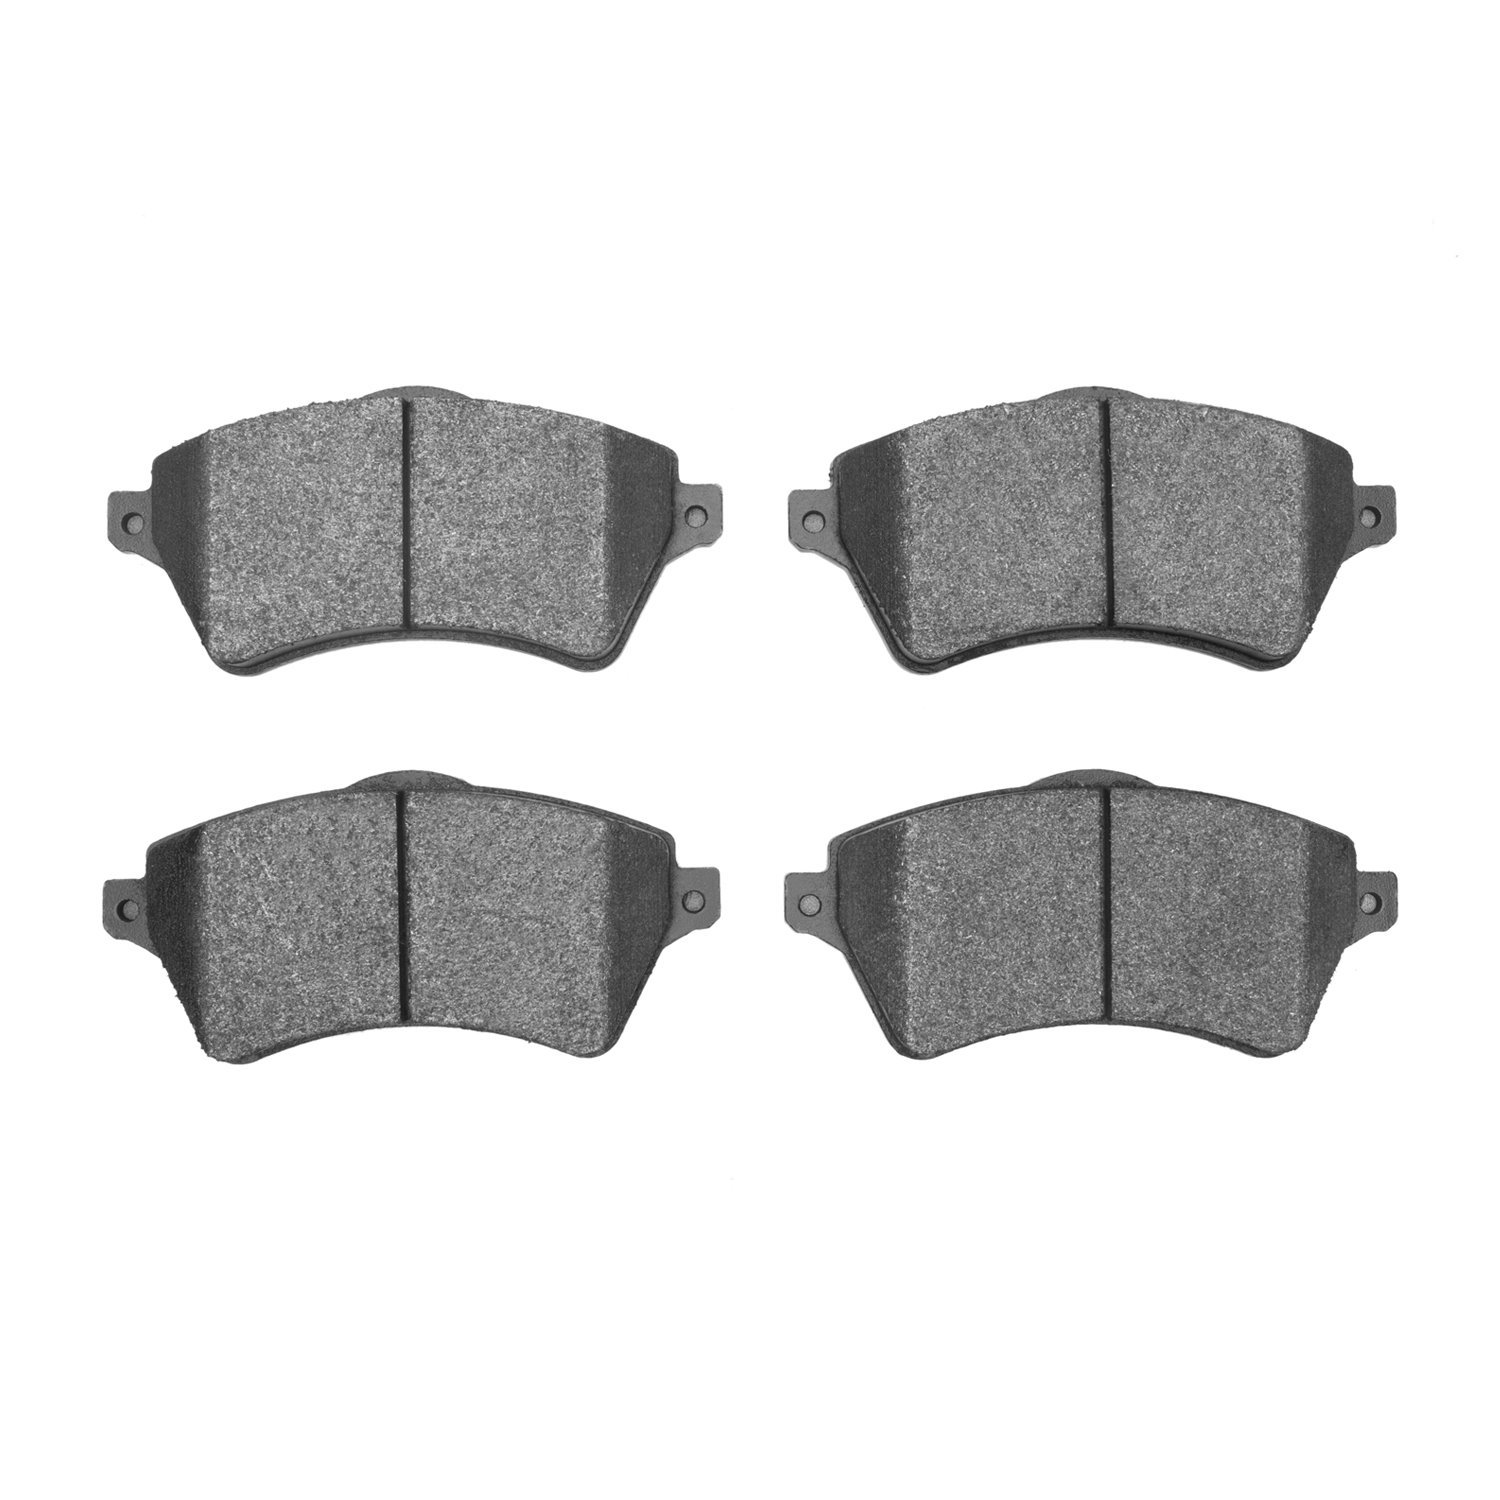 1551-0926-00 5000 Advanced Low-Metallic Brake Pads, 2002-2005 Land Rover, Position: Front